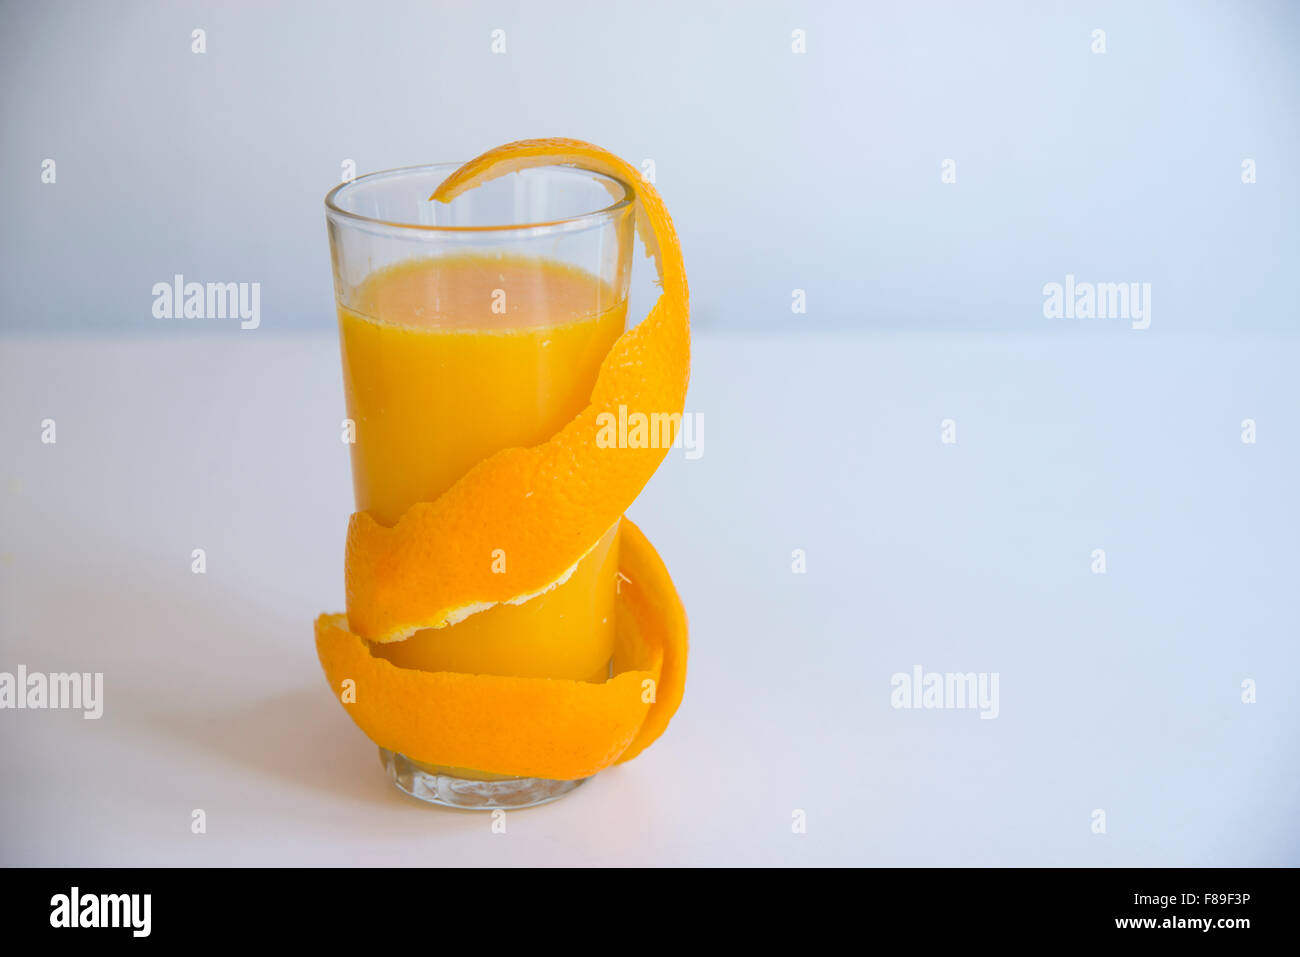 Glass of orange juice with the peel coiled around the glass. Stock Photo